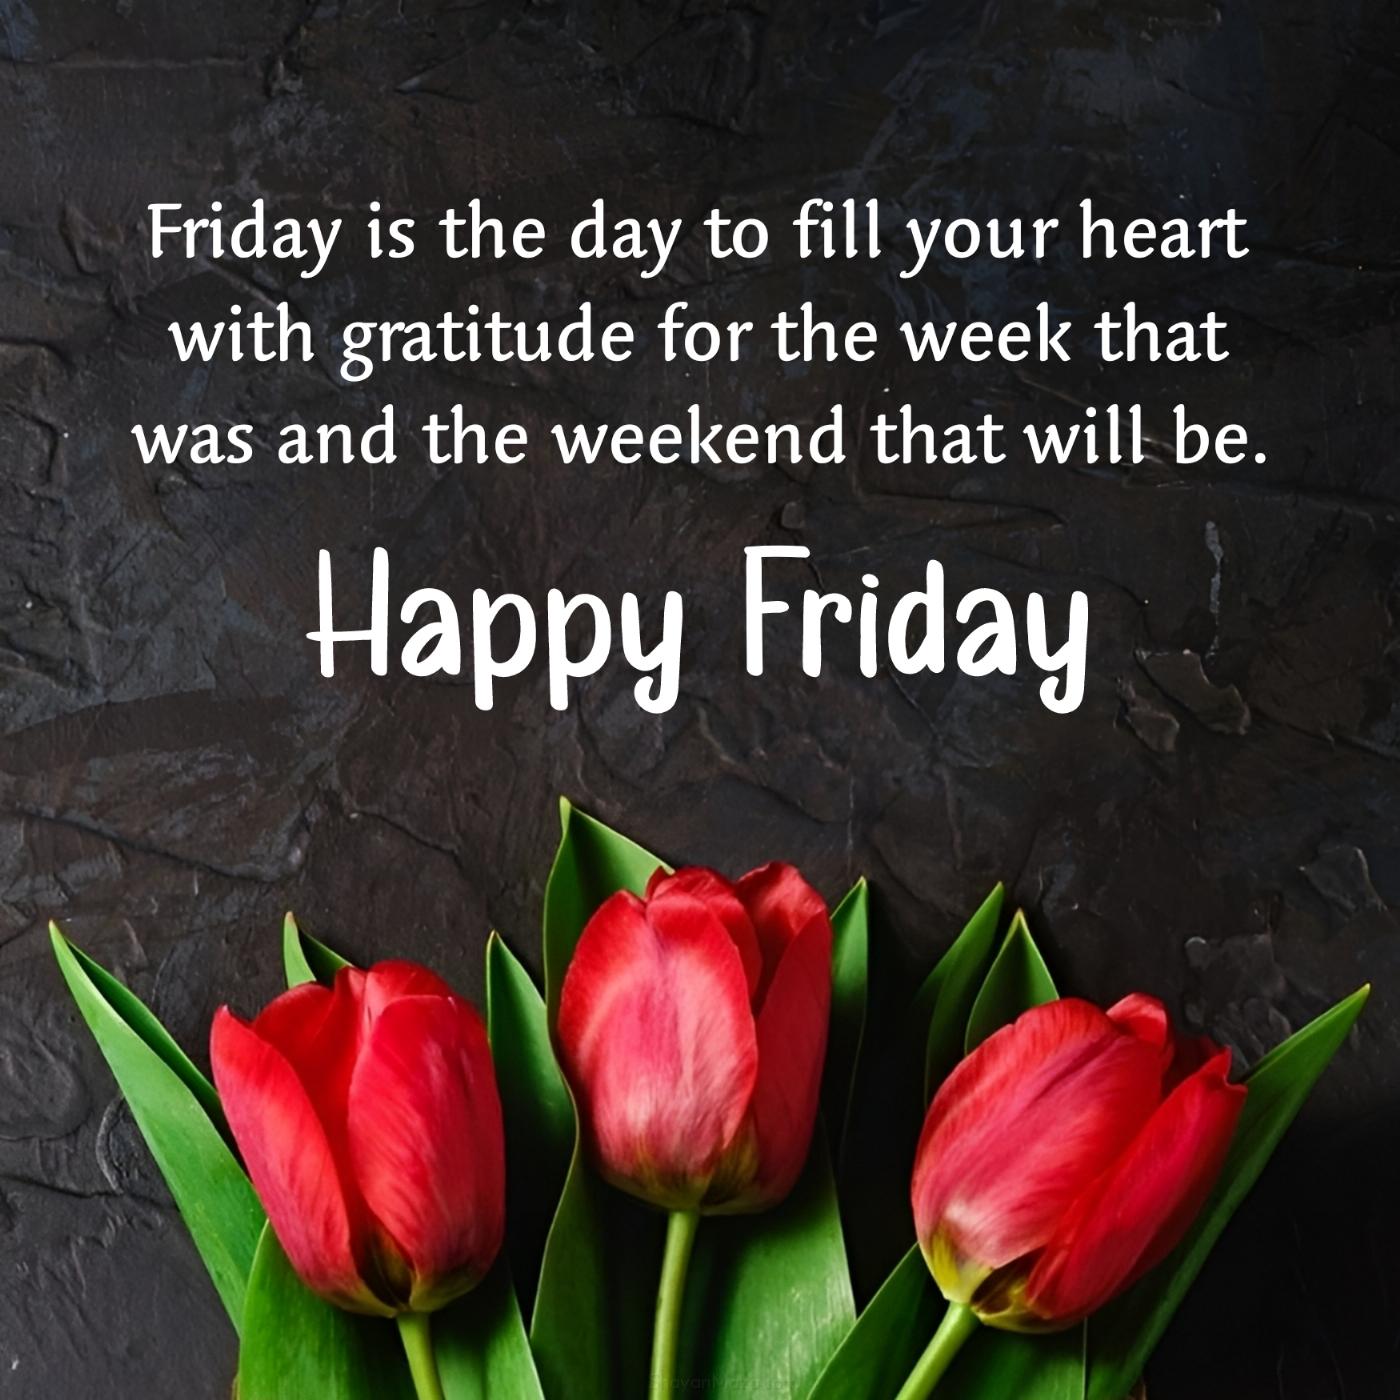 Friday is the day to fill your heart with gratitude for the week